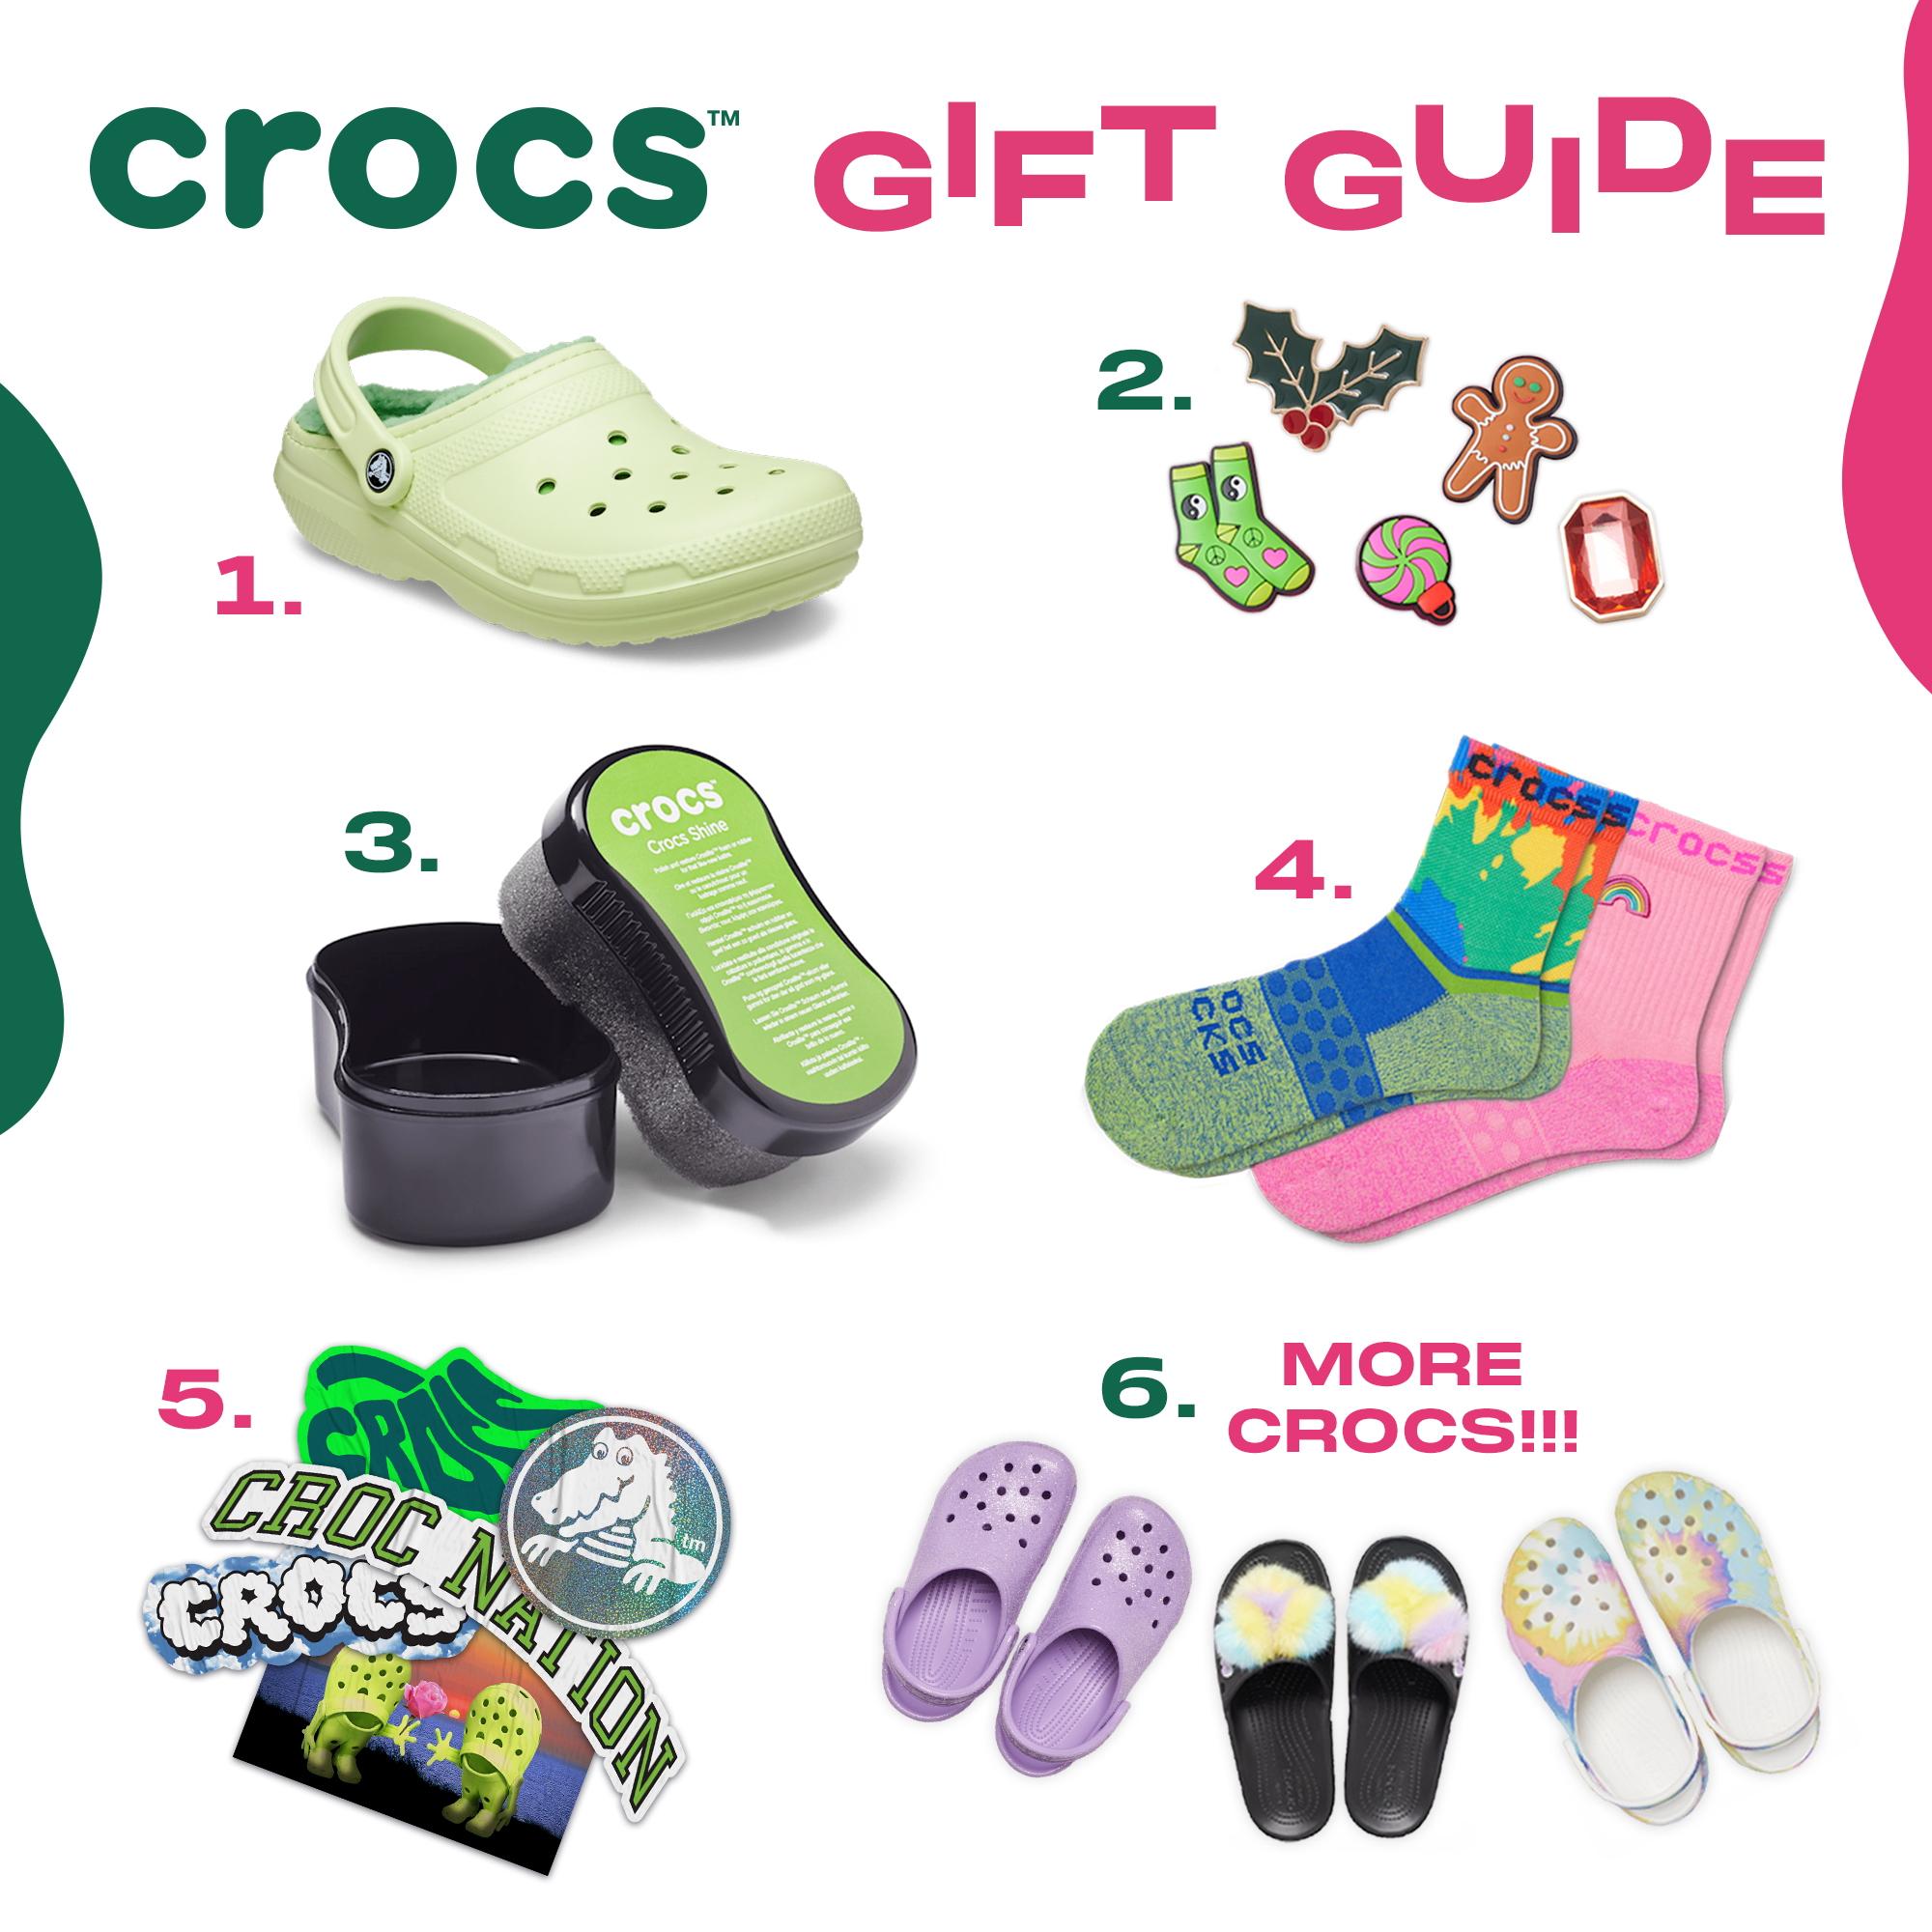 Crocs on X: Our guide to converting everyone into Croc lovers